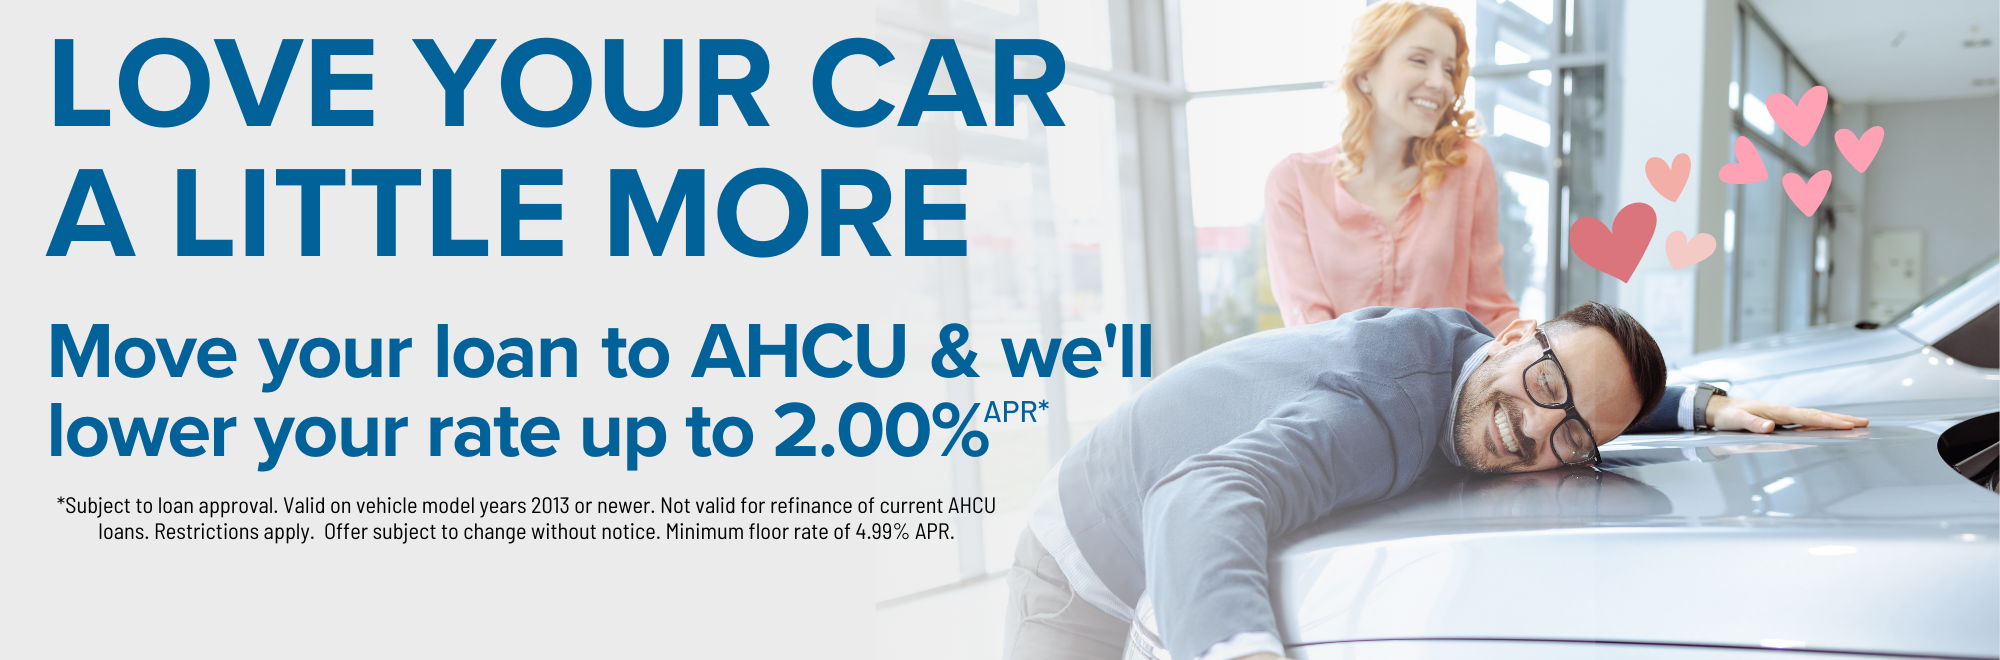 Move your loan to AHCU and we'll beat your current rate by up to 2.00% APR